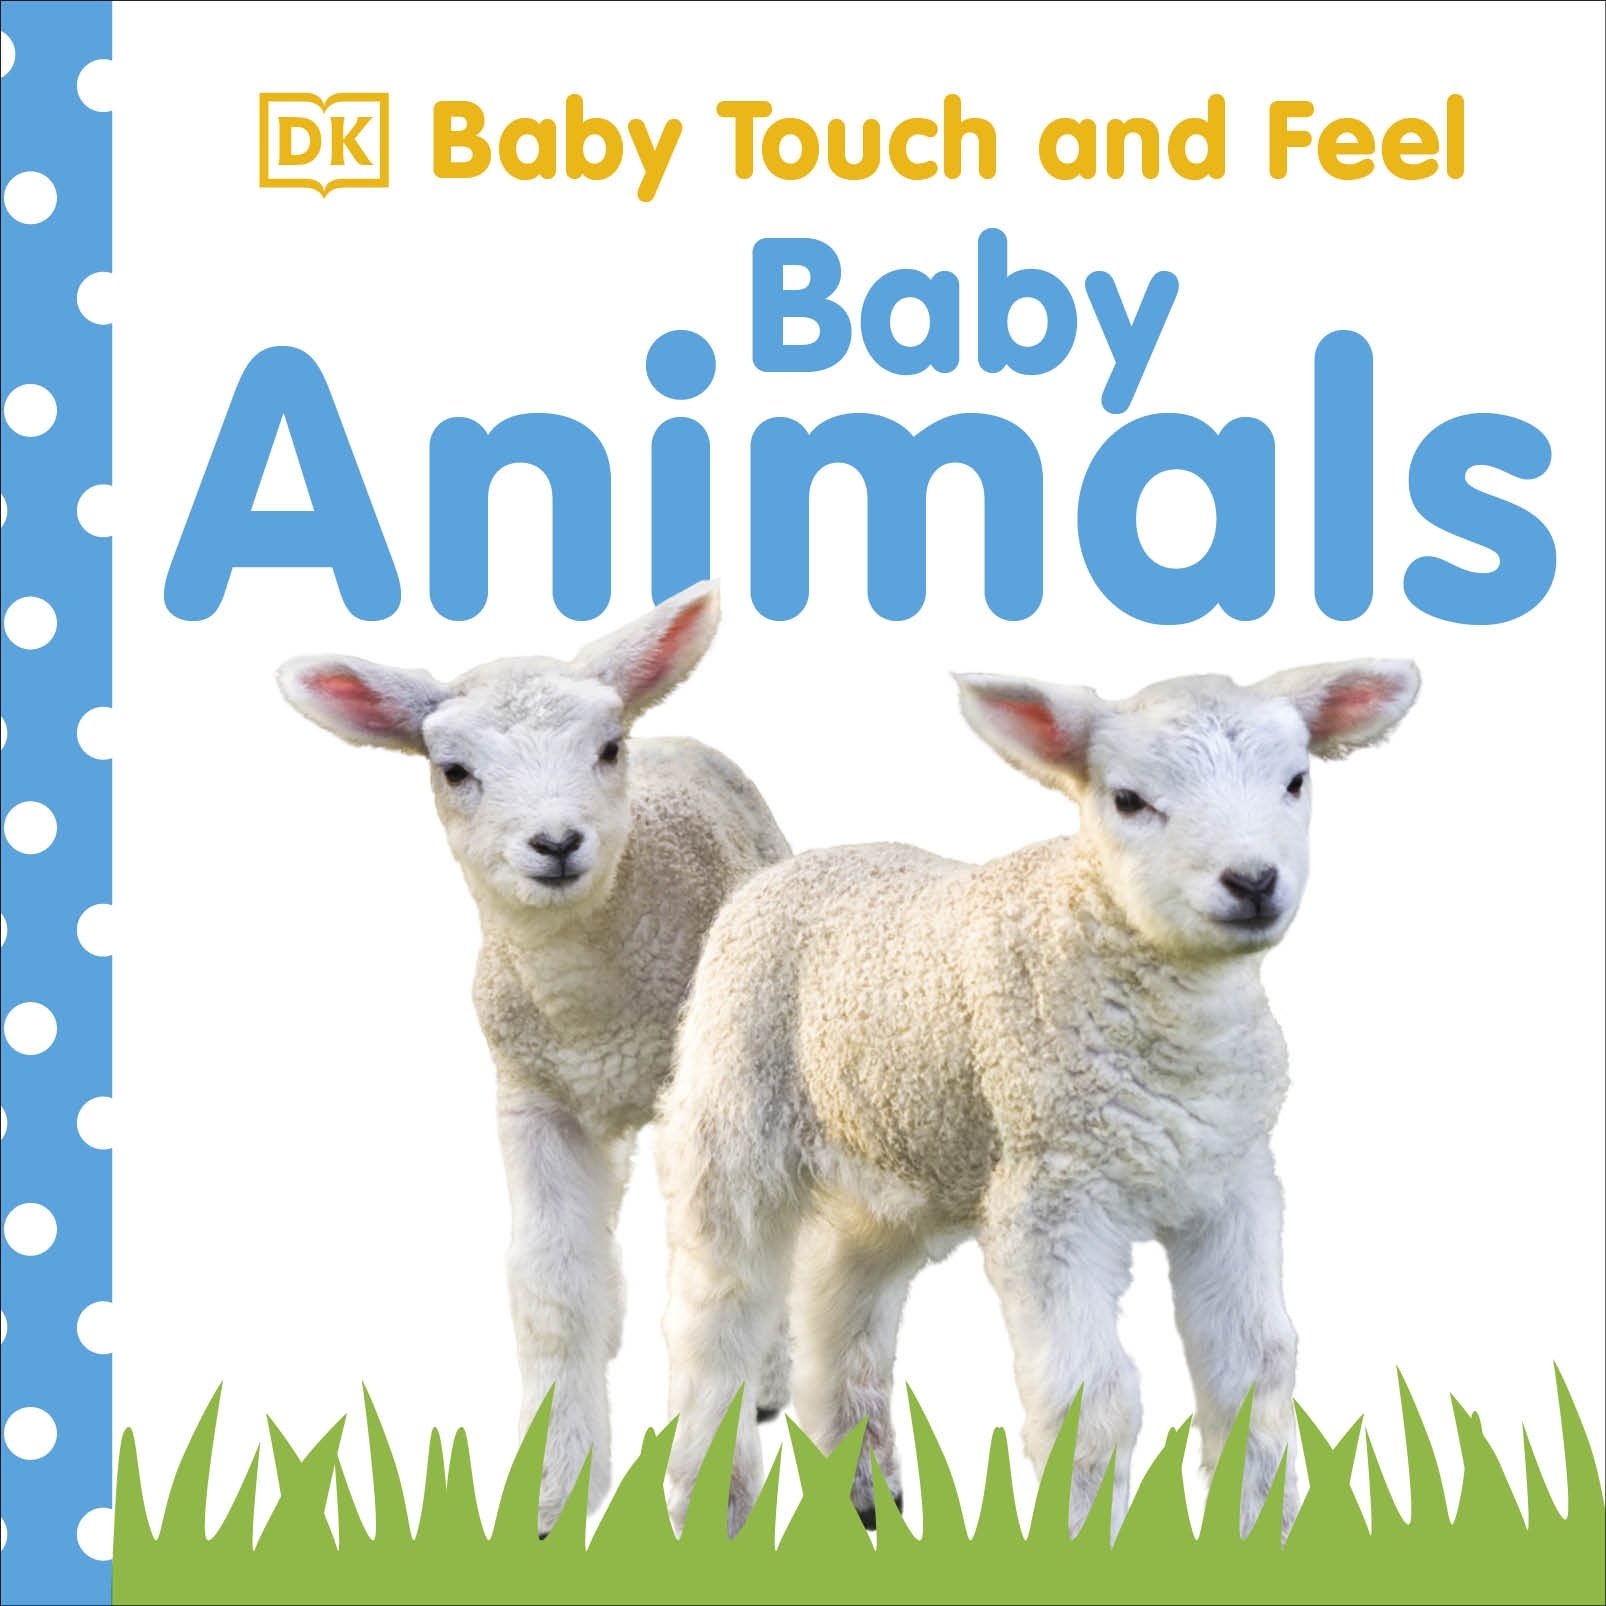 Baby Touch And Feel Baby Animals By Dk Penguin Books Australia